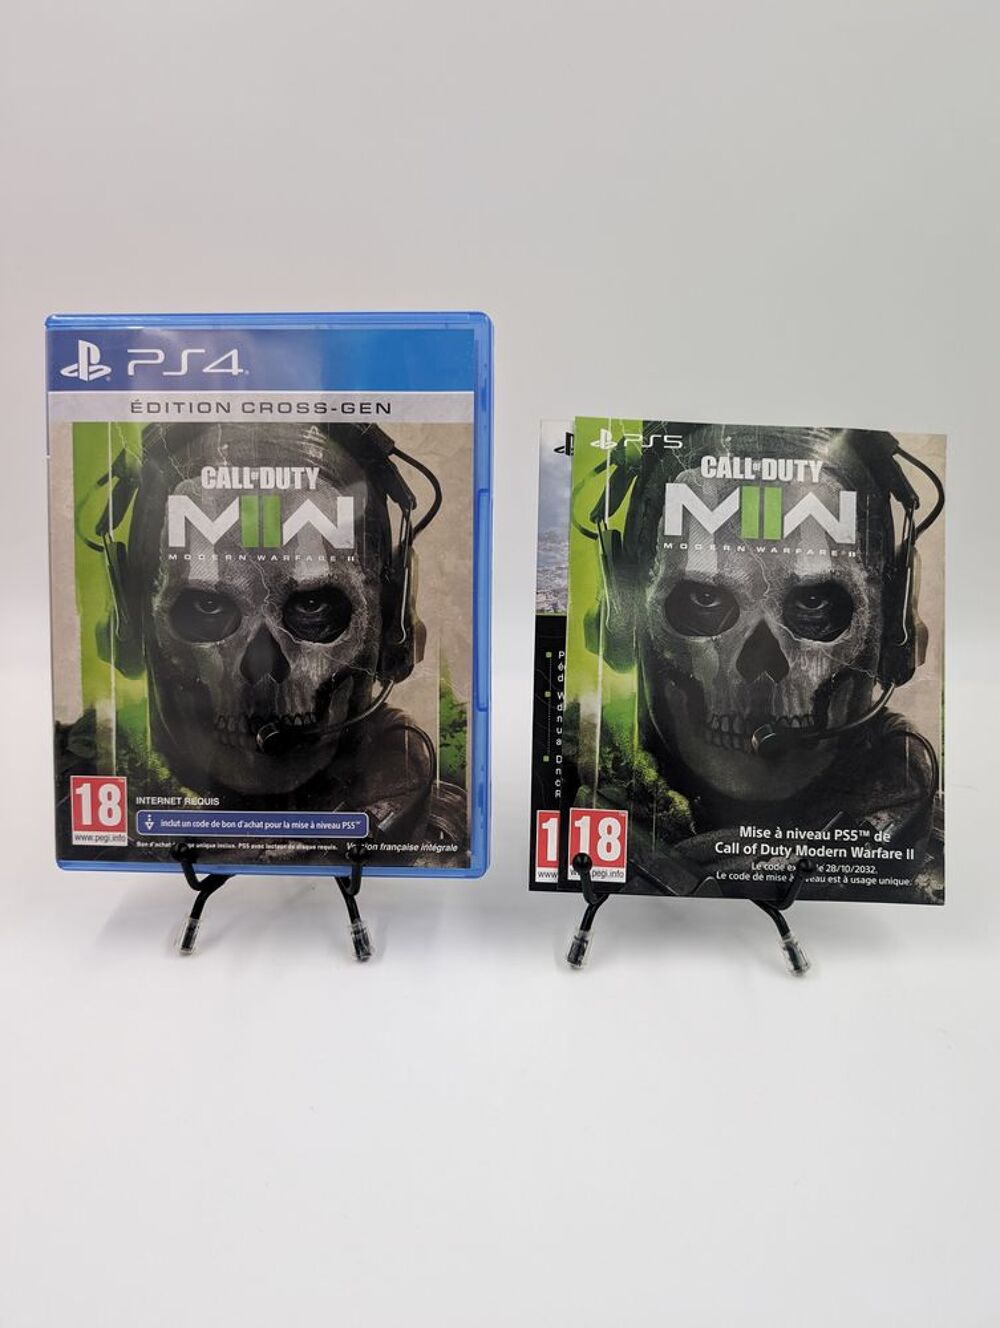 Jeu PS4 Playstation 4 Call of Duty Modern Warfare II complet Consoles et jeux vidos